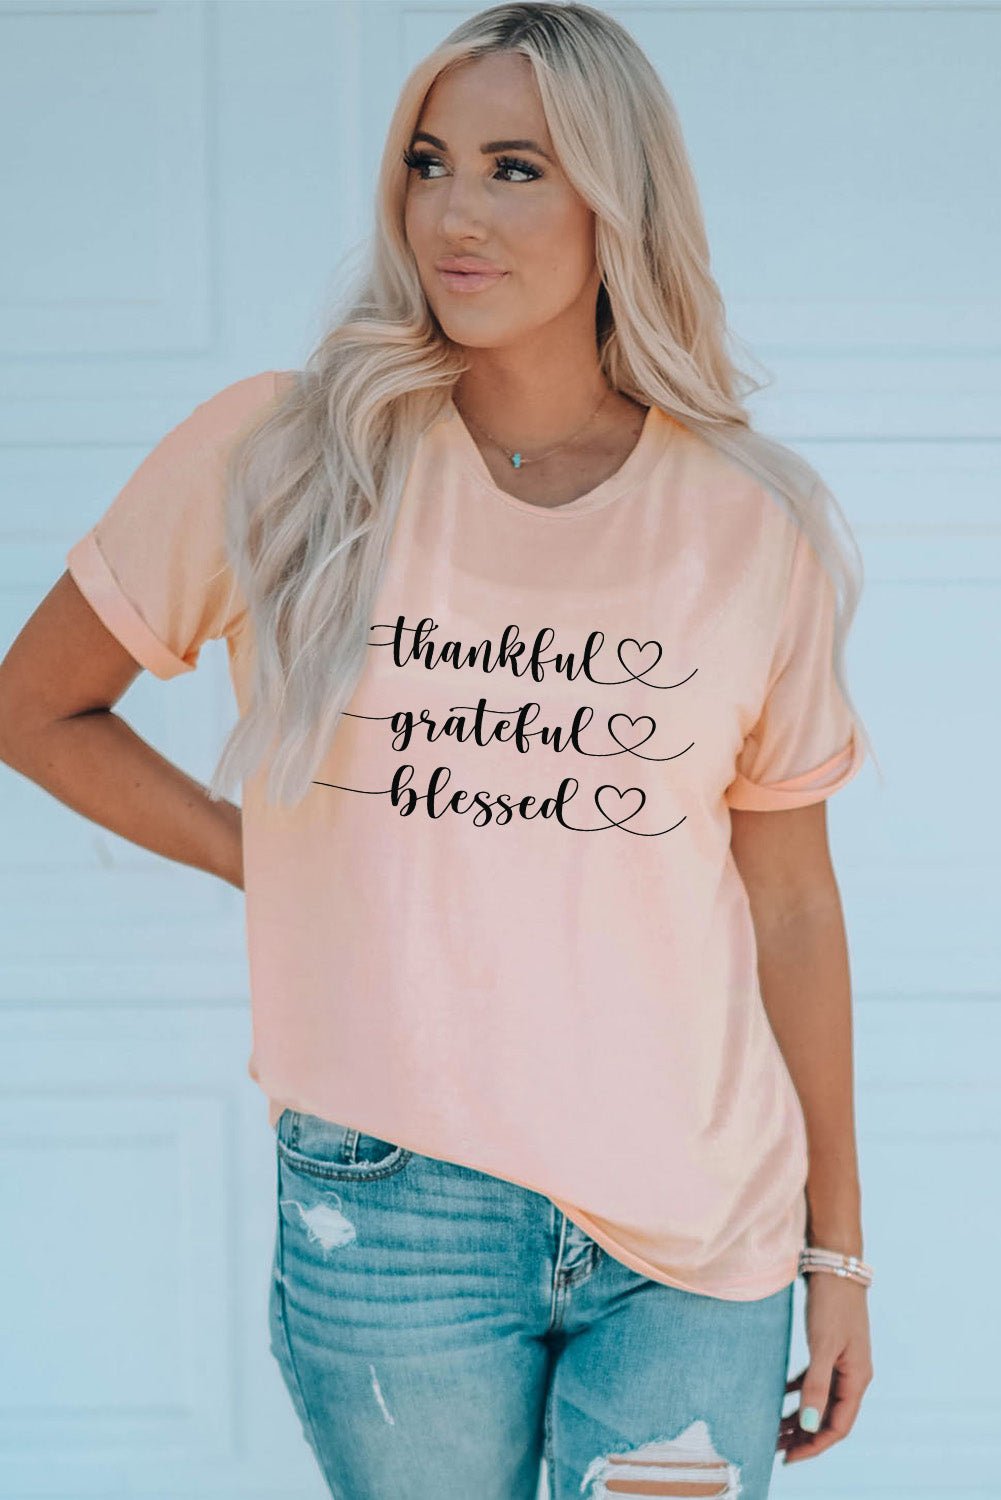 Full Size THANKFUL GRATEFUL BLESSED Graphic Round Neck Pink Tee